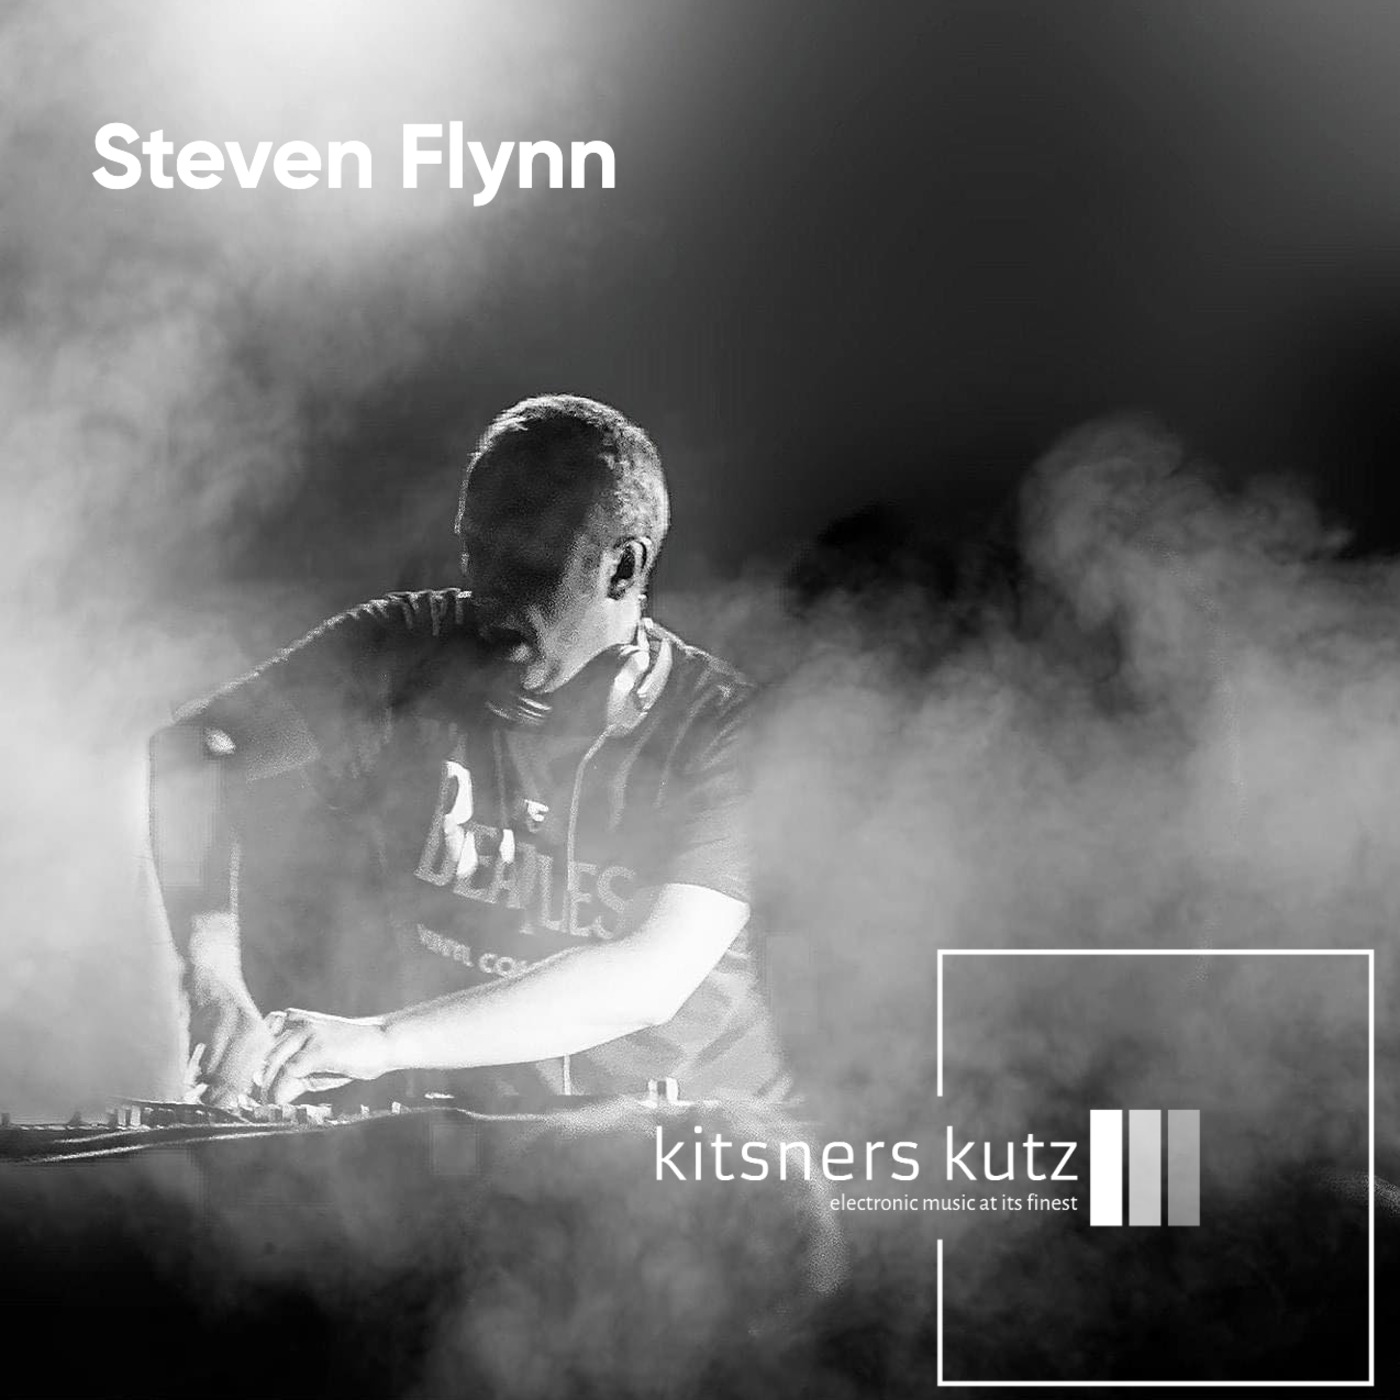 Episode 4: Uplifting Grooves with Steven Flynn in an Exclusive DJ Set"